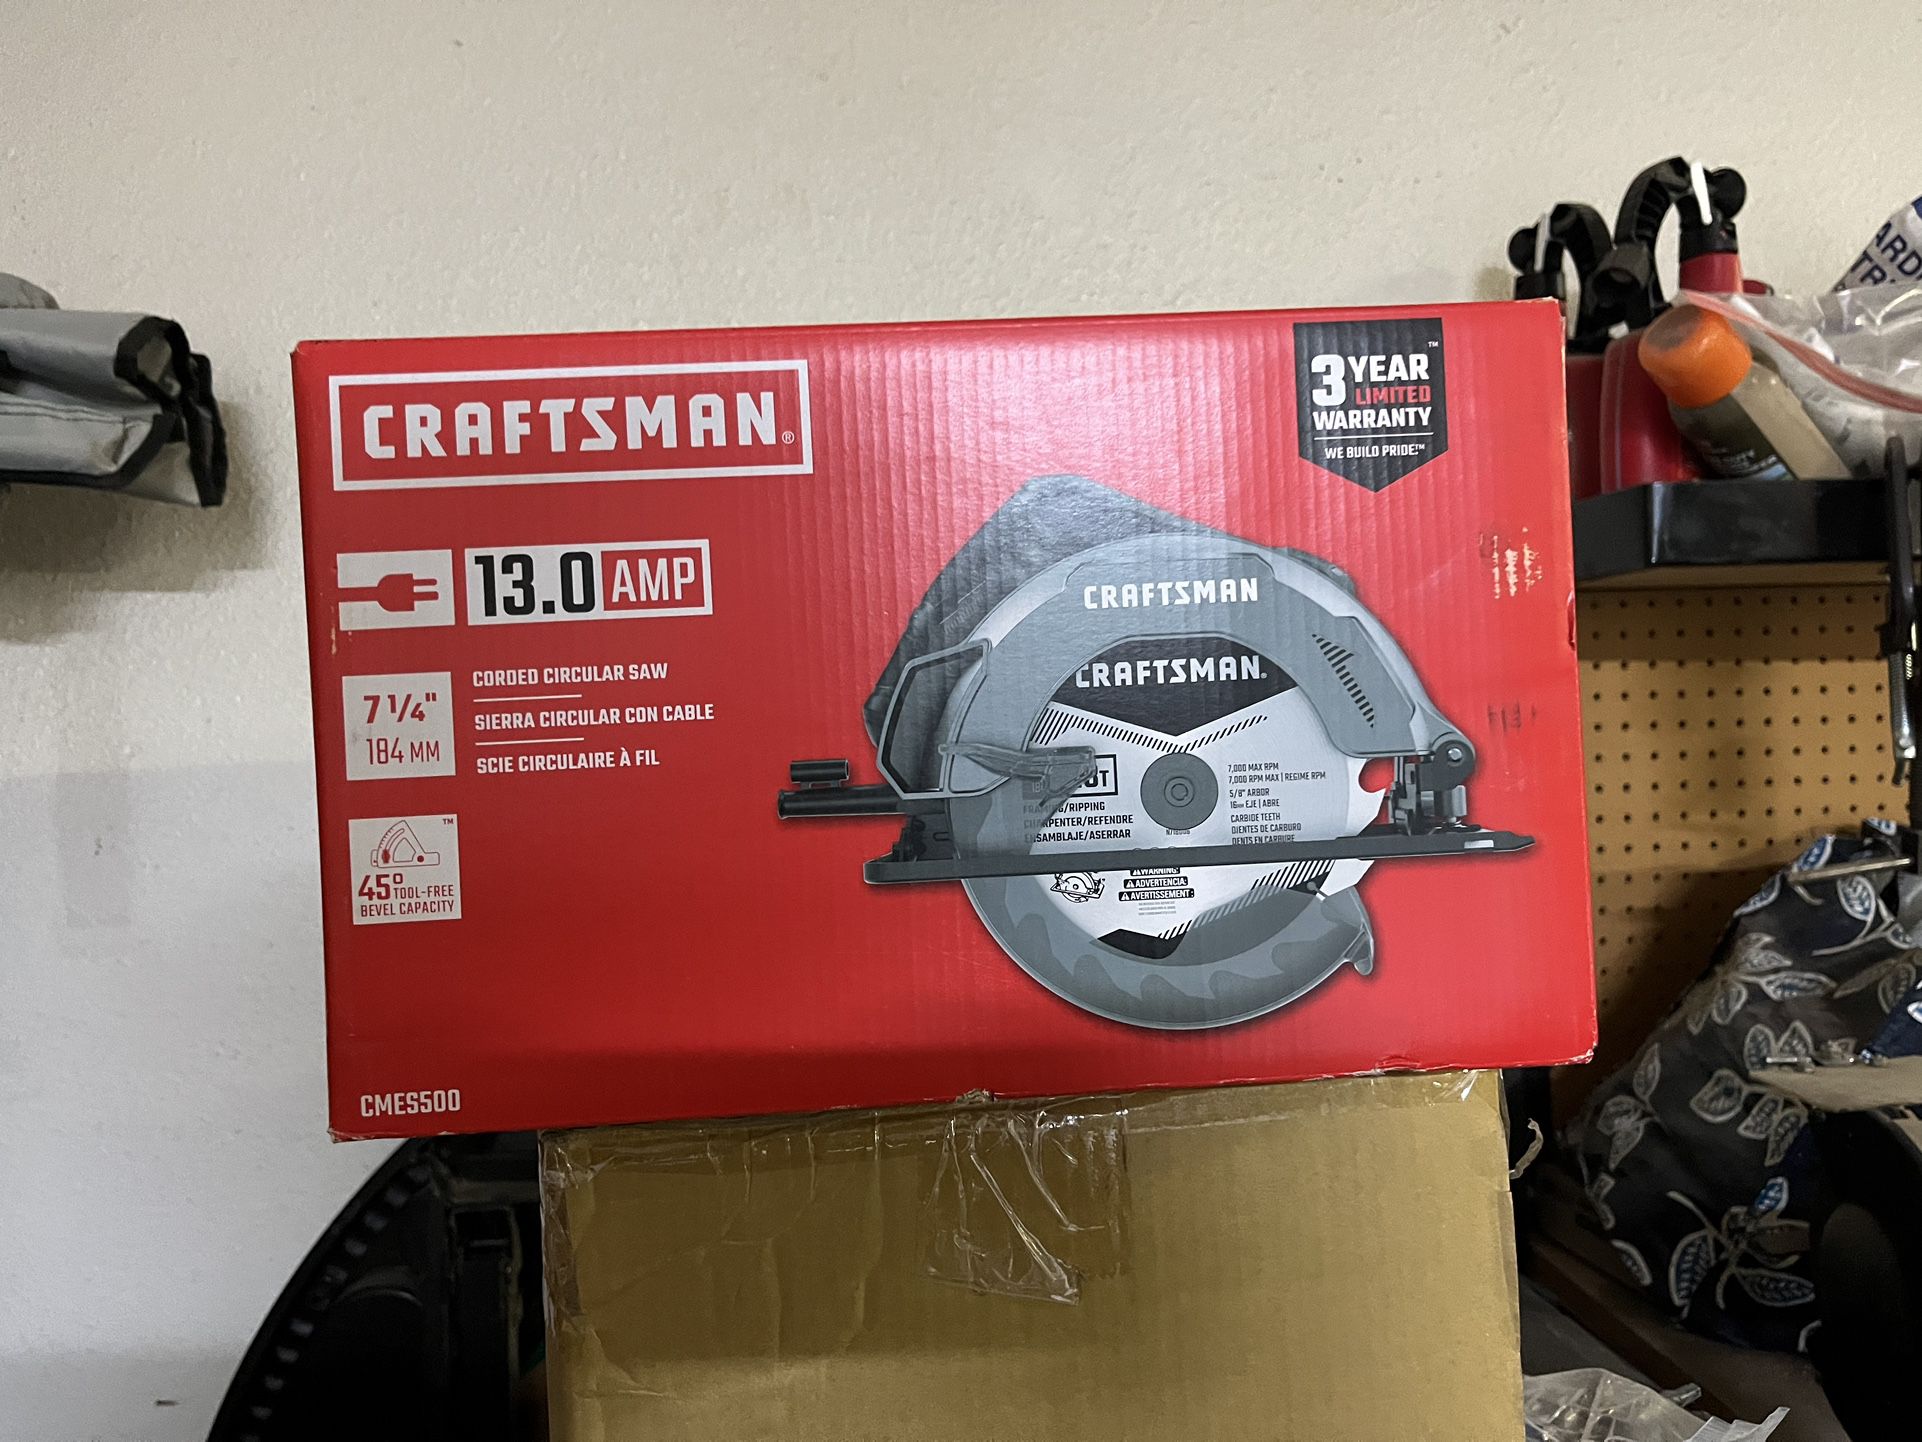 CRAFTSMAN 13-Amp 7-1/4-in Corded Circular Saw for Sale in Modesto, CA  OfferUp